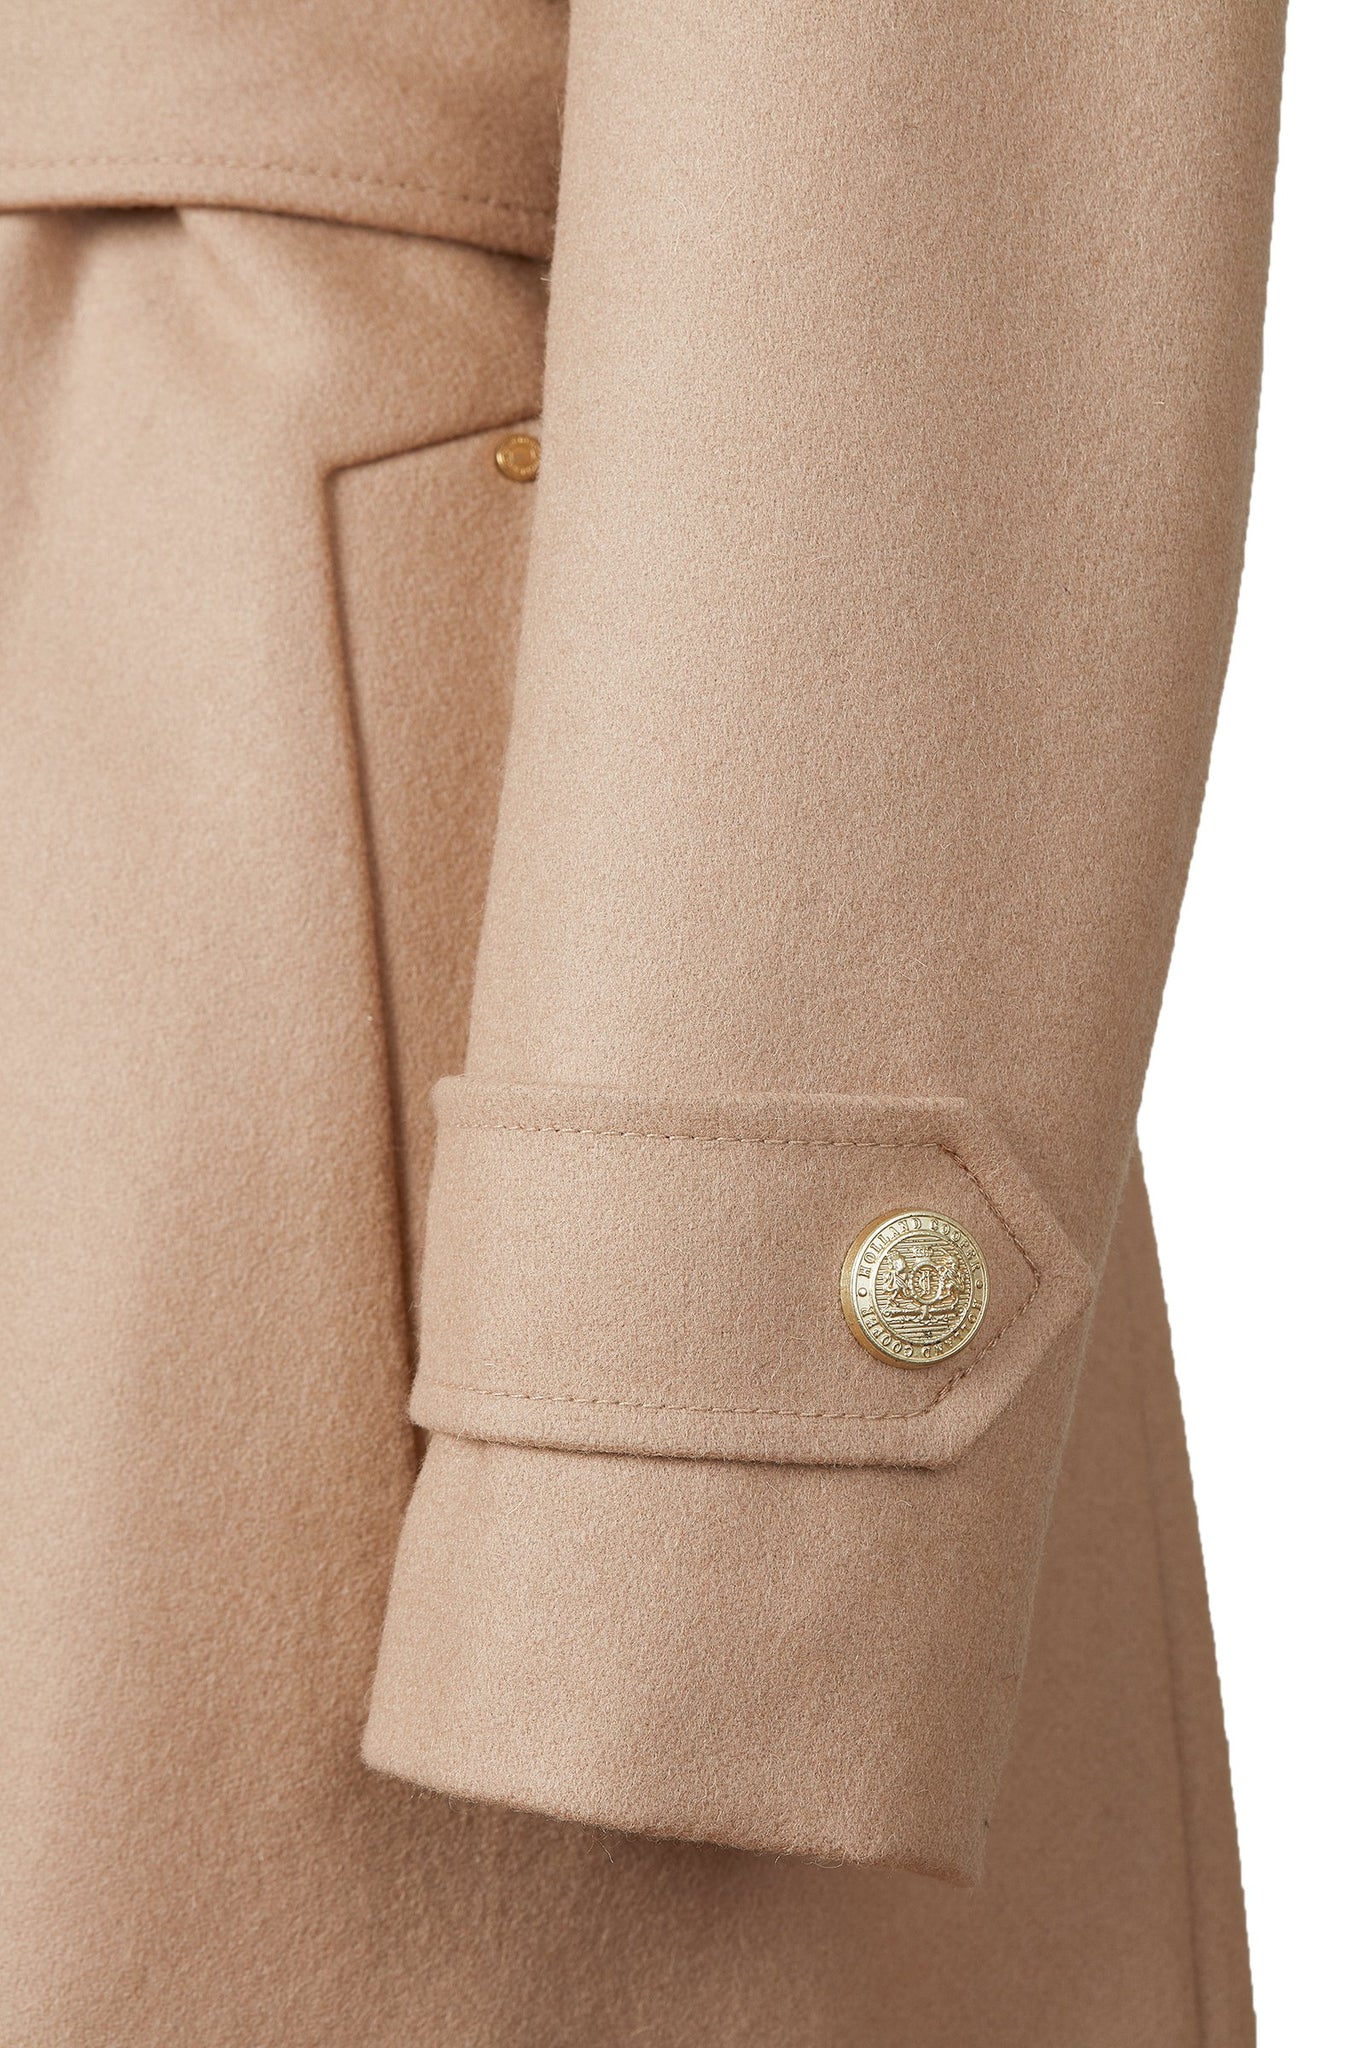 gold button on sleeve cuff detail on Womens camel mid length wrap coat with tie belt